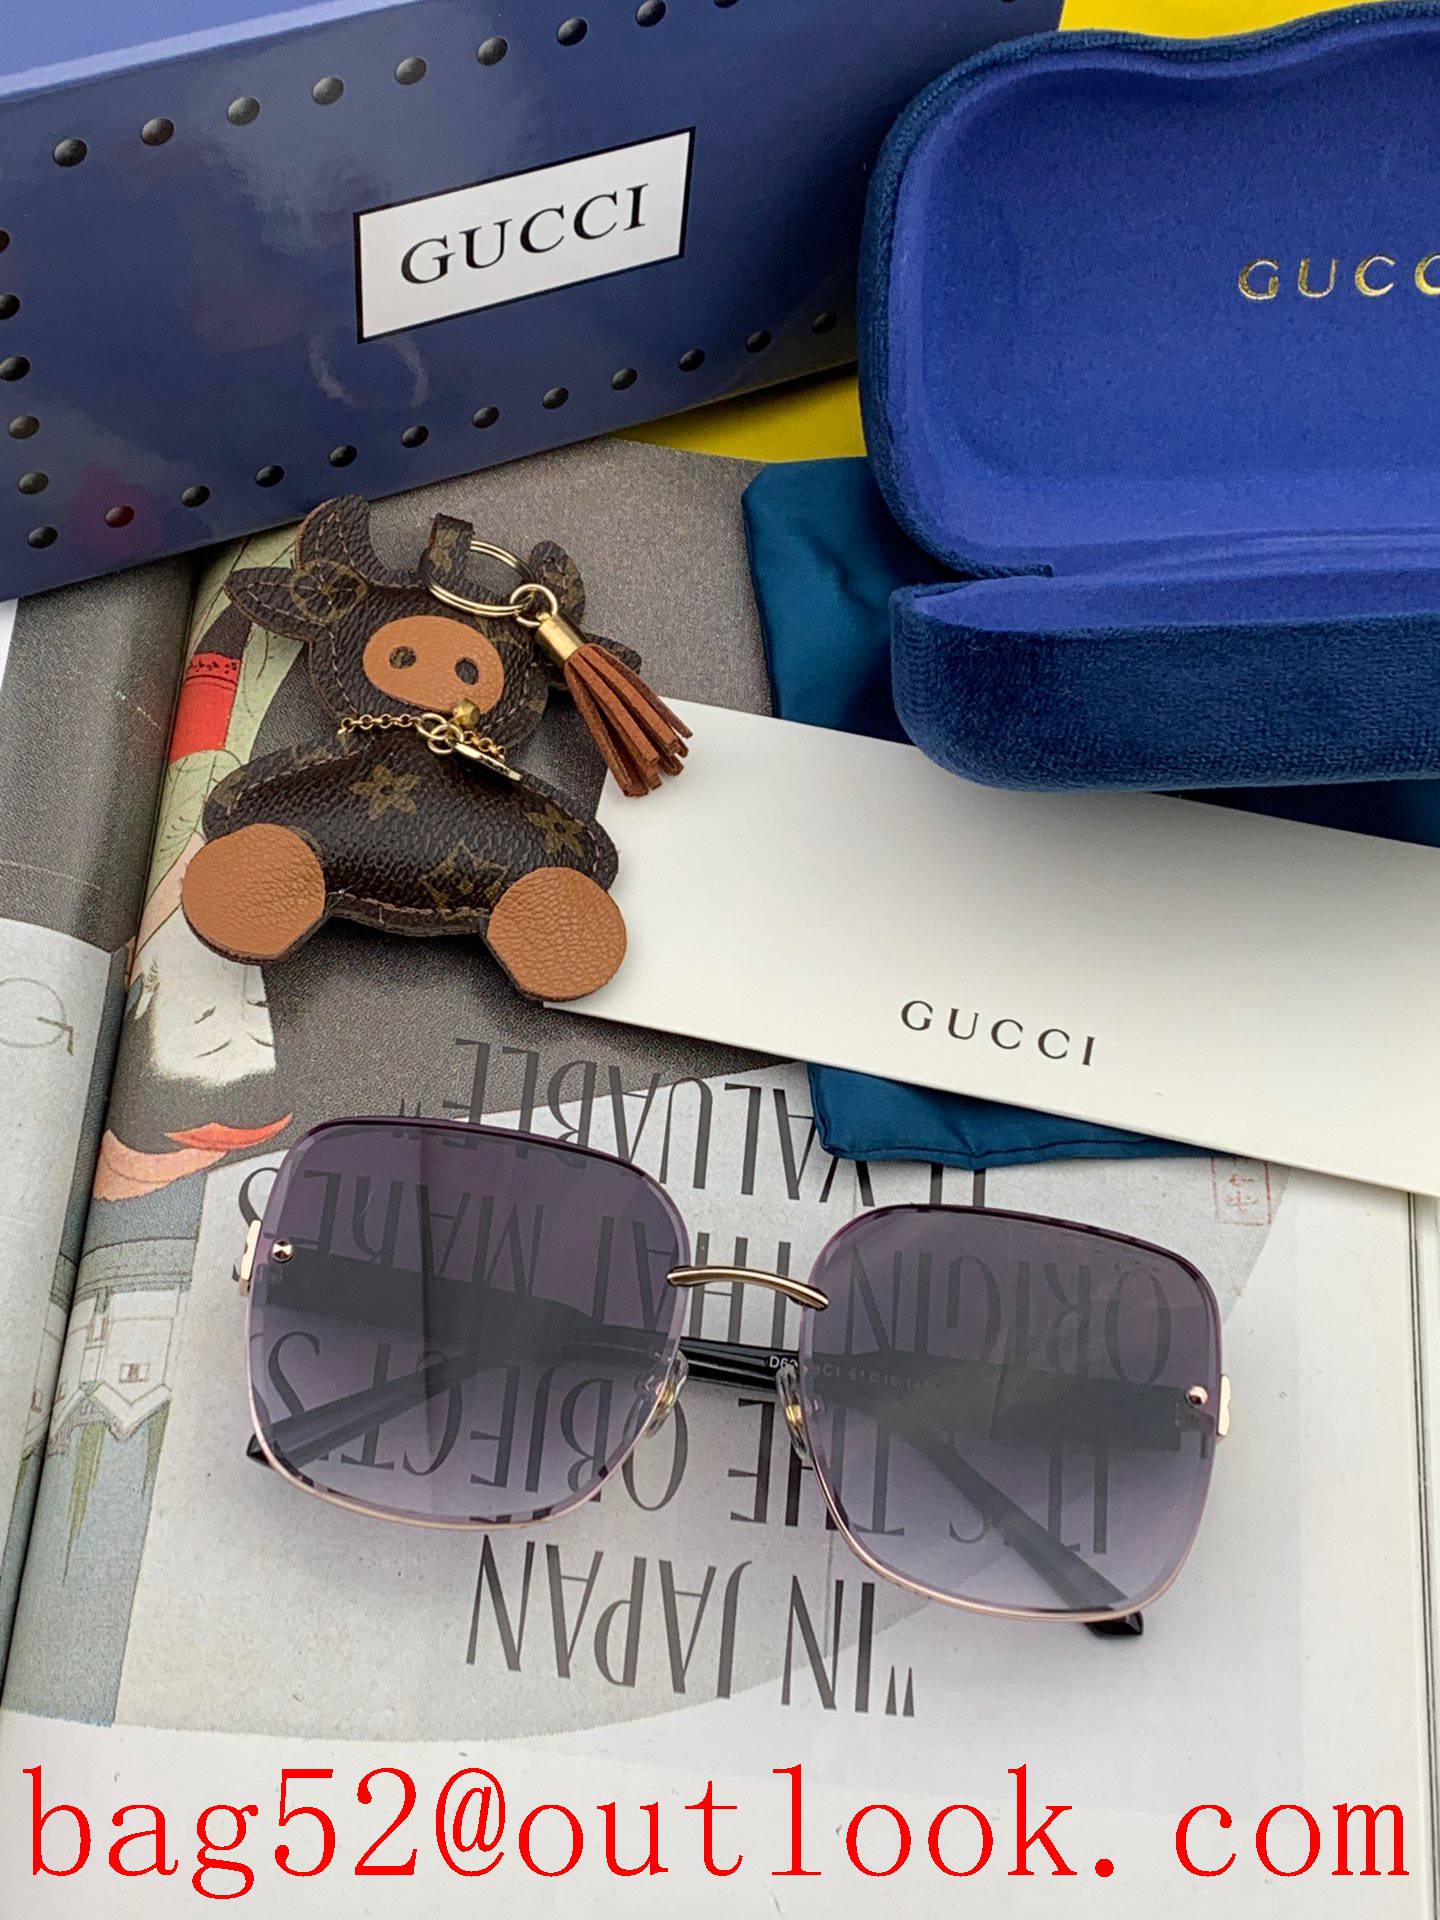 Gucci Patented slingshot technology that opens and closes at the temple hinge sunglasses